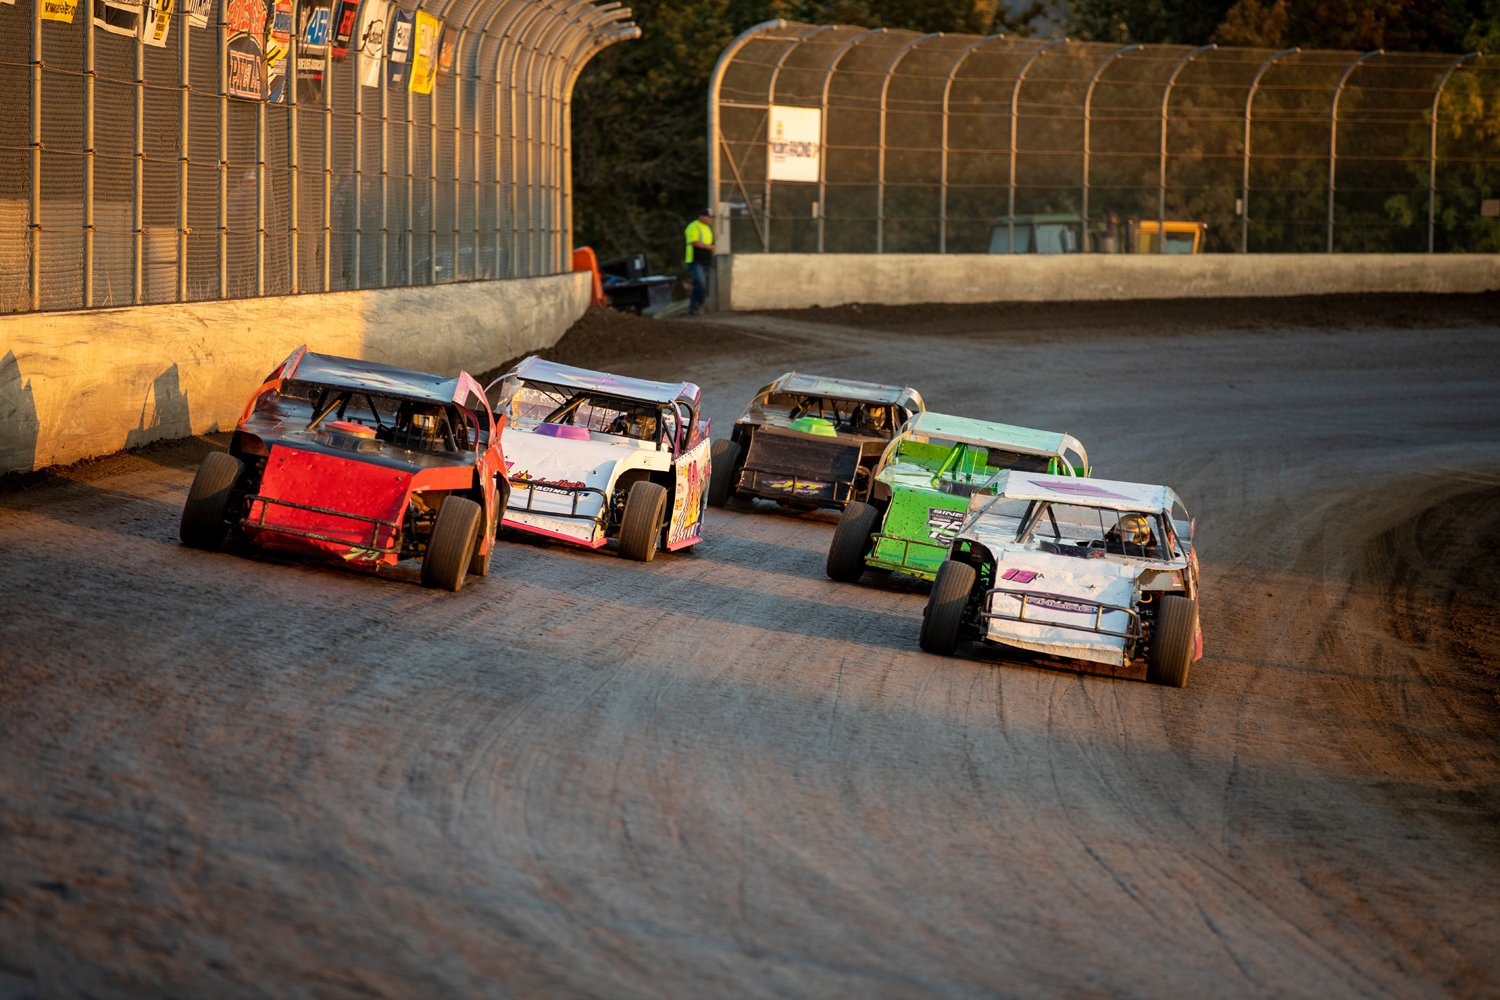  IMCA sport mods race Saturday at the Willamette Speedway in Lebanon, Ore. IMCA, or the International Motor Contest Associated, hosted its first modified car race in 1972 in Benton County, Iowa on a ¼ mile dirt track. They now sanction races in 36 st